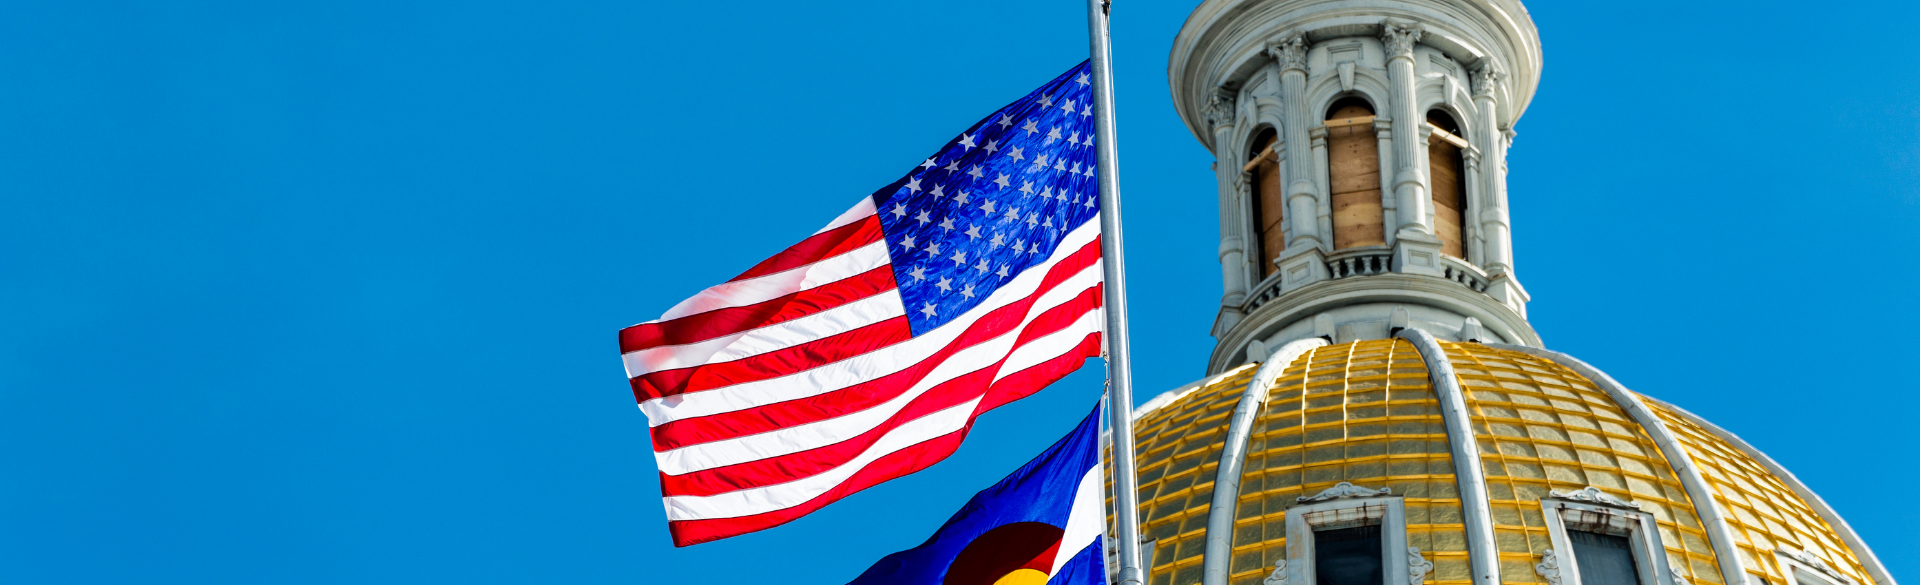 Celebrating the beginning of National Colorectal Cancer Awareness Month, the Colorado Cancer Coalition is headed for the state Capitol on March 2.